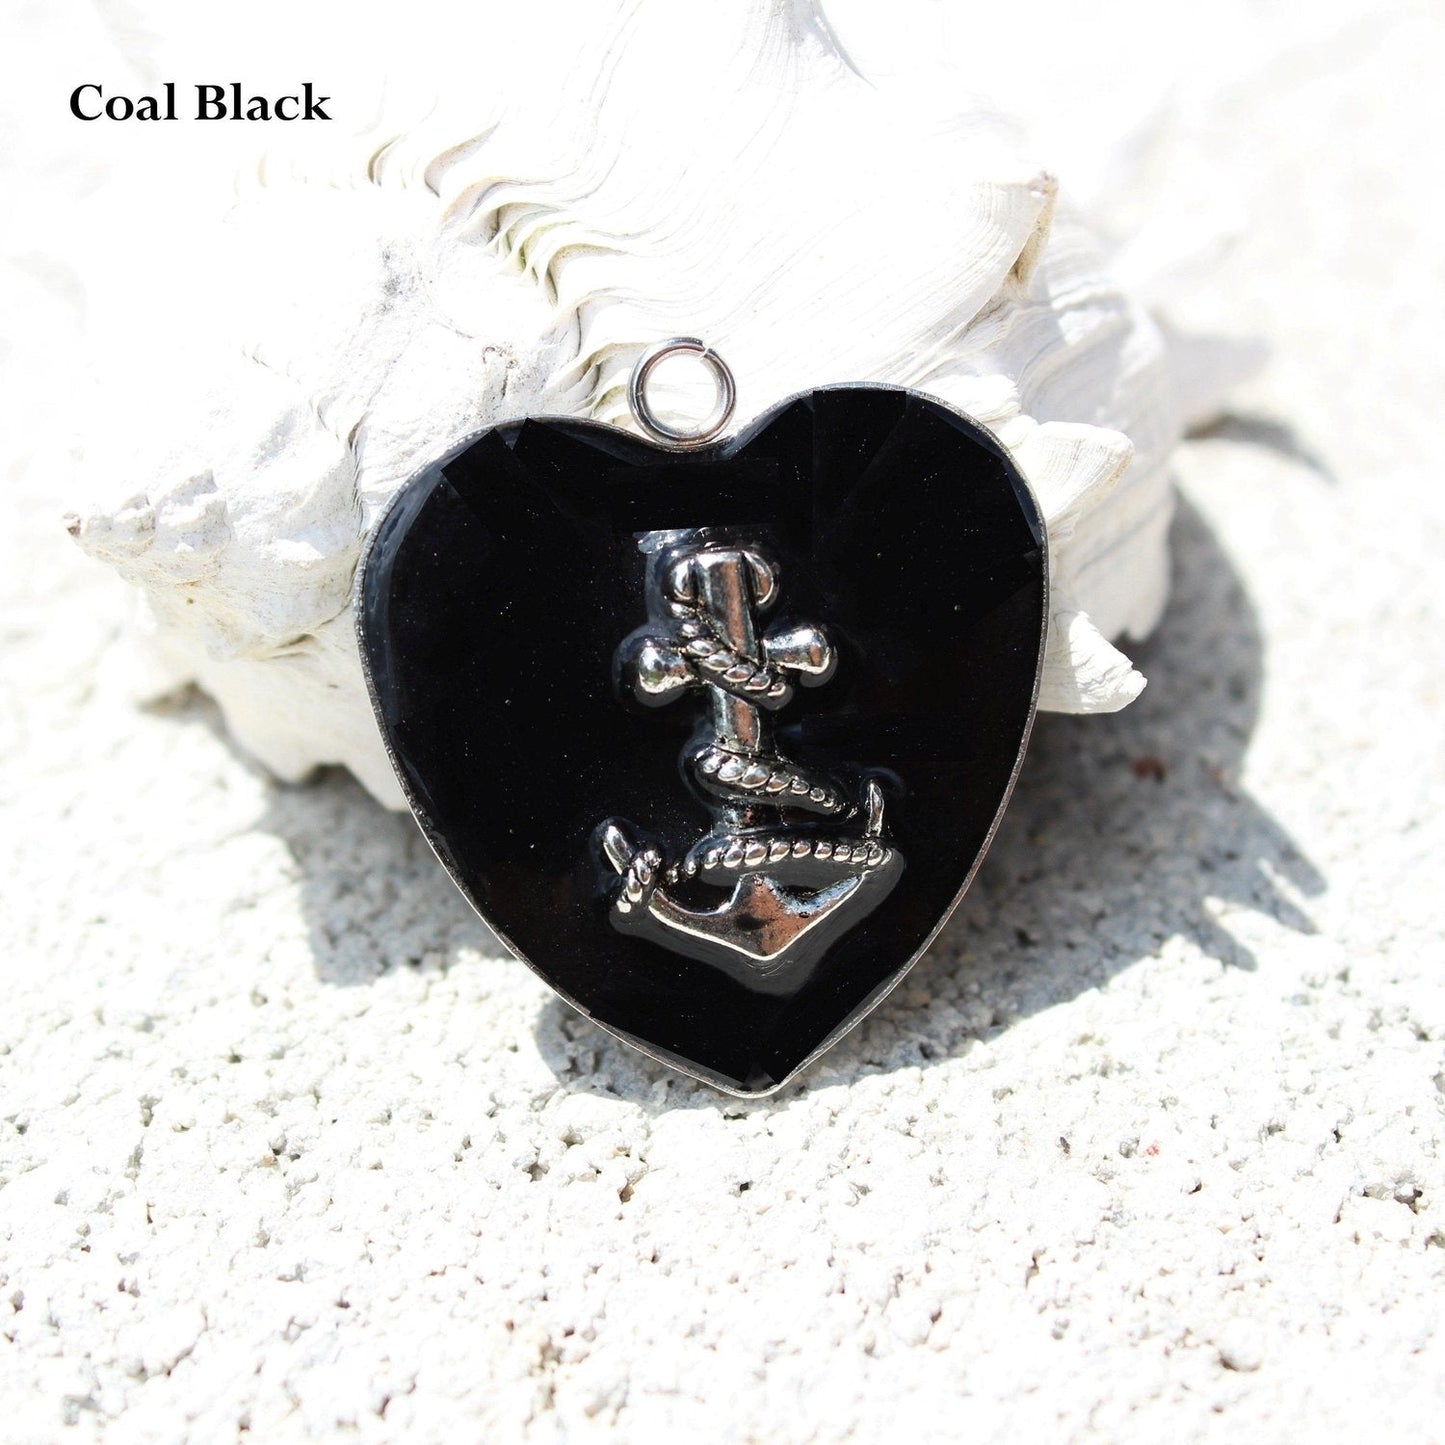 The Anchor Cremation Pendant